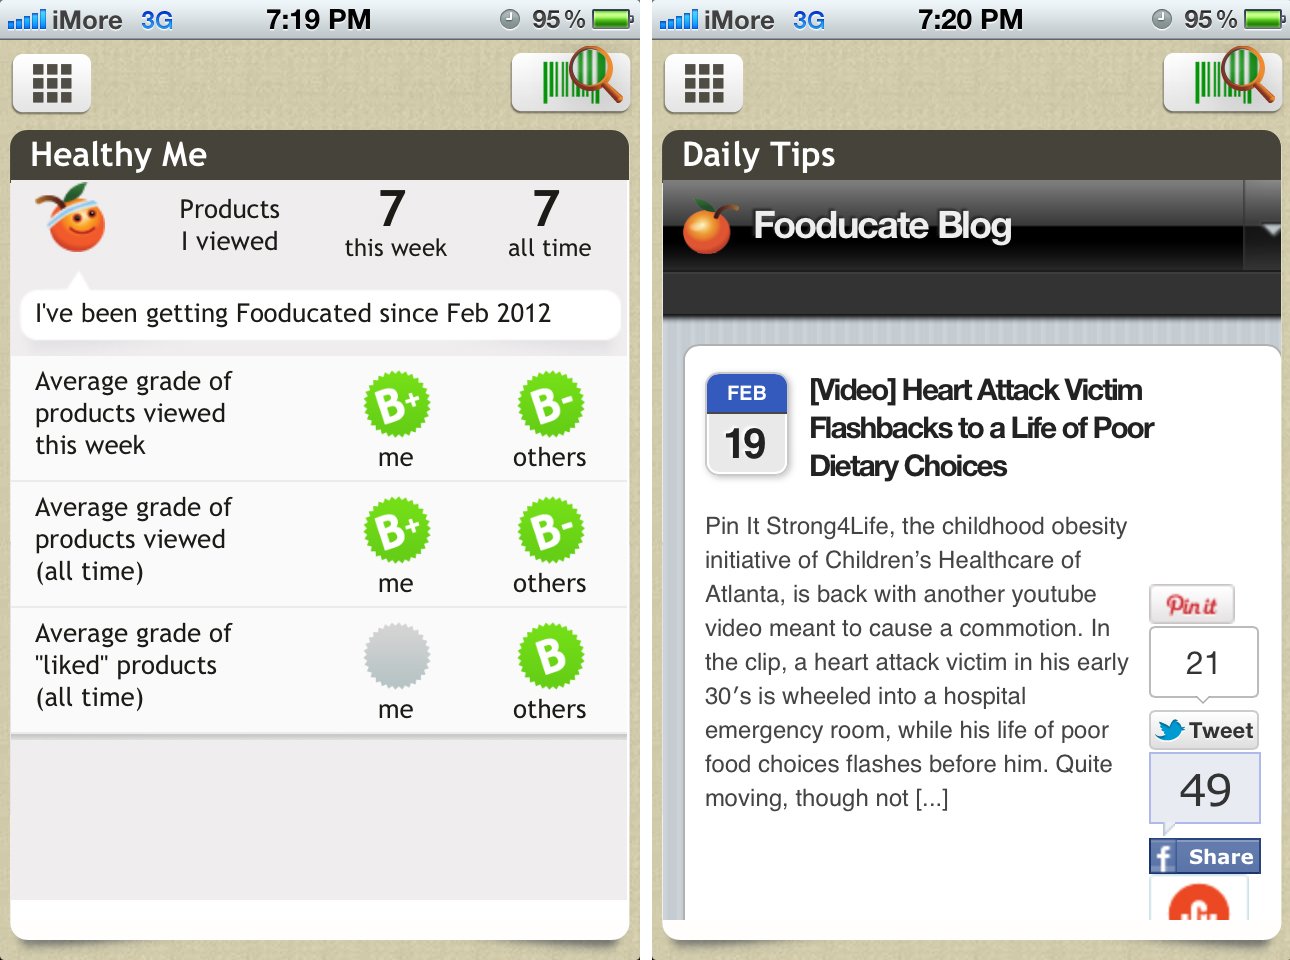 Compare your food choices to others with Fooducate